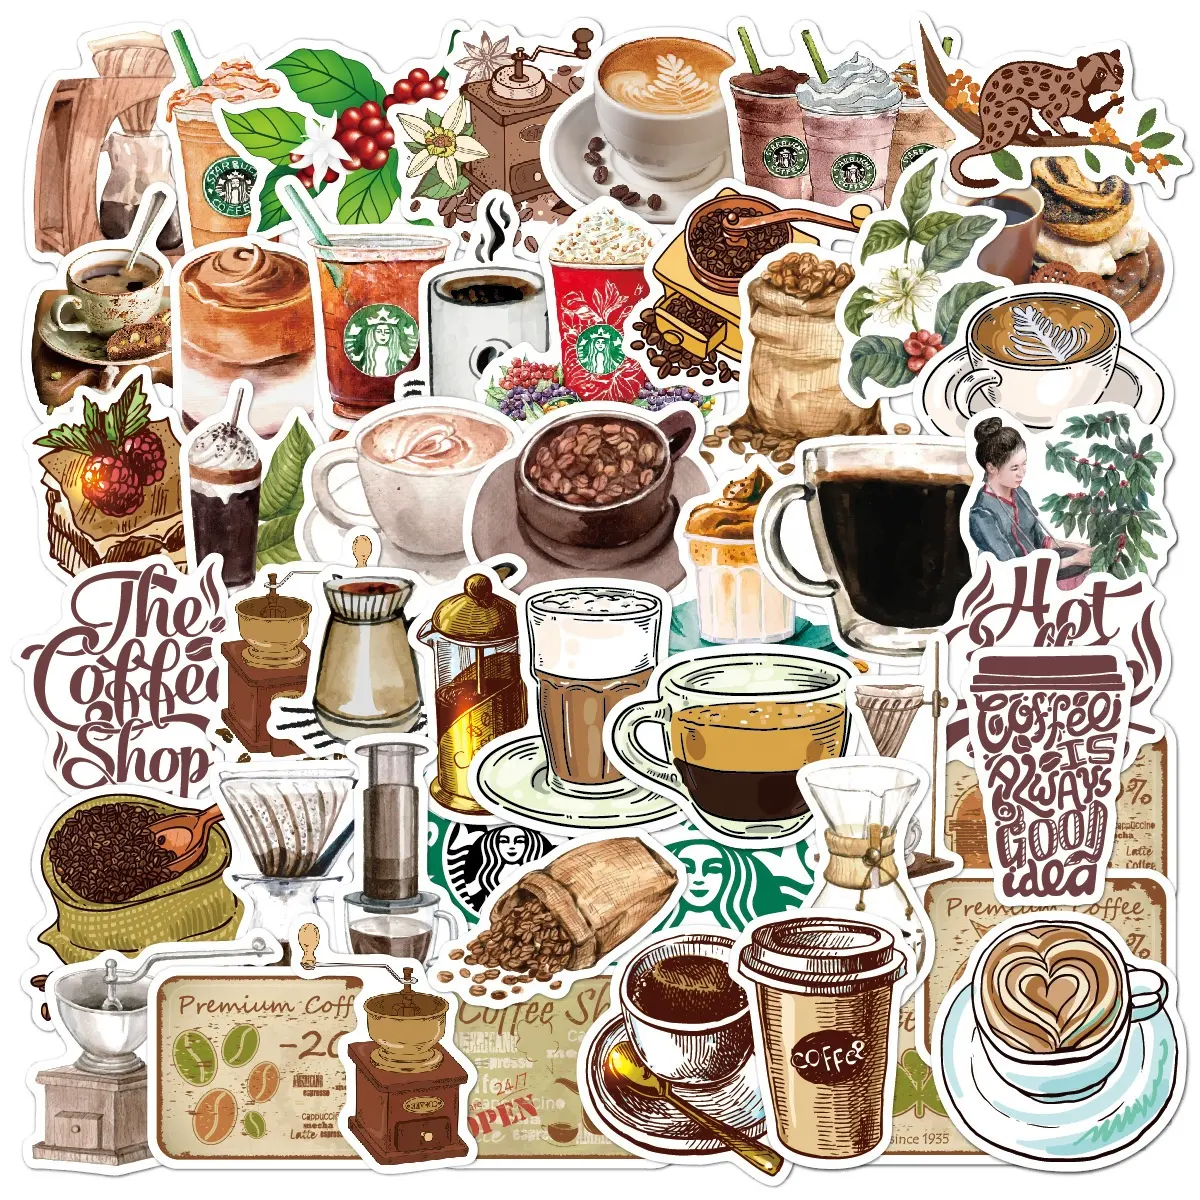 50Pcs Vintage Coffee Stickers For Notebook Laptop Car Wall Book Diary Decor Luggage Shop Cartoon Decorative Sticker